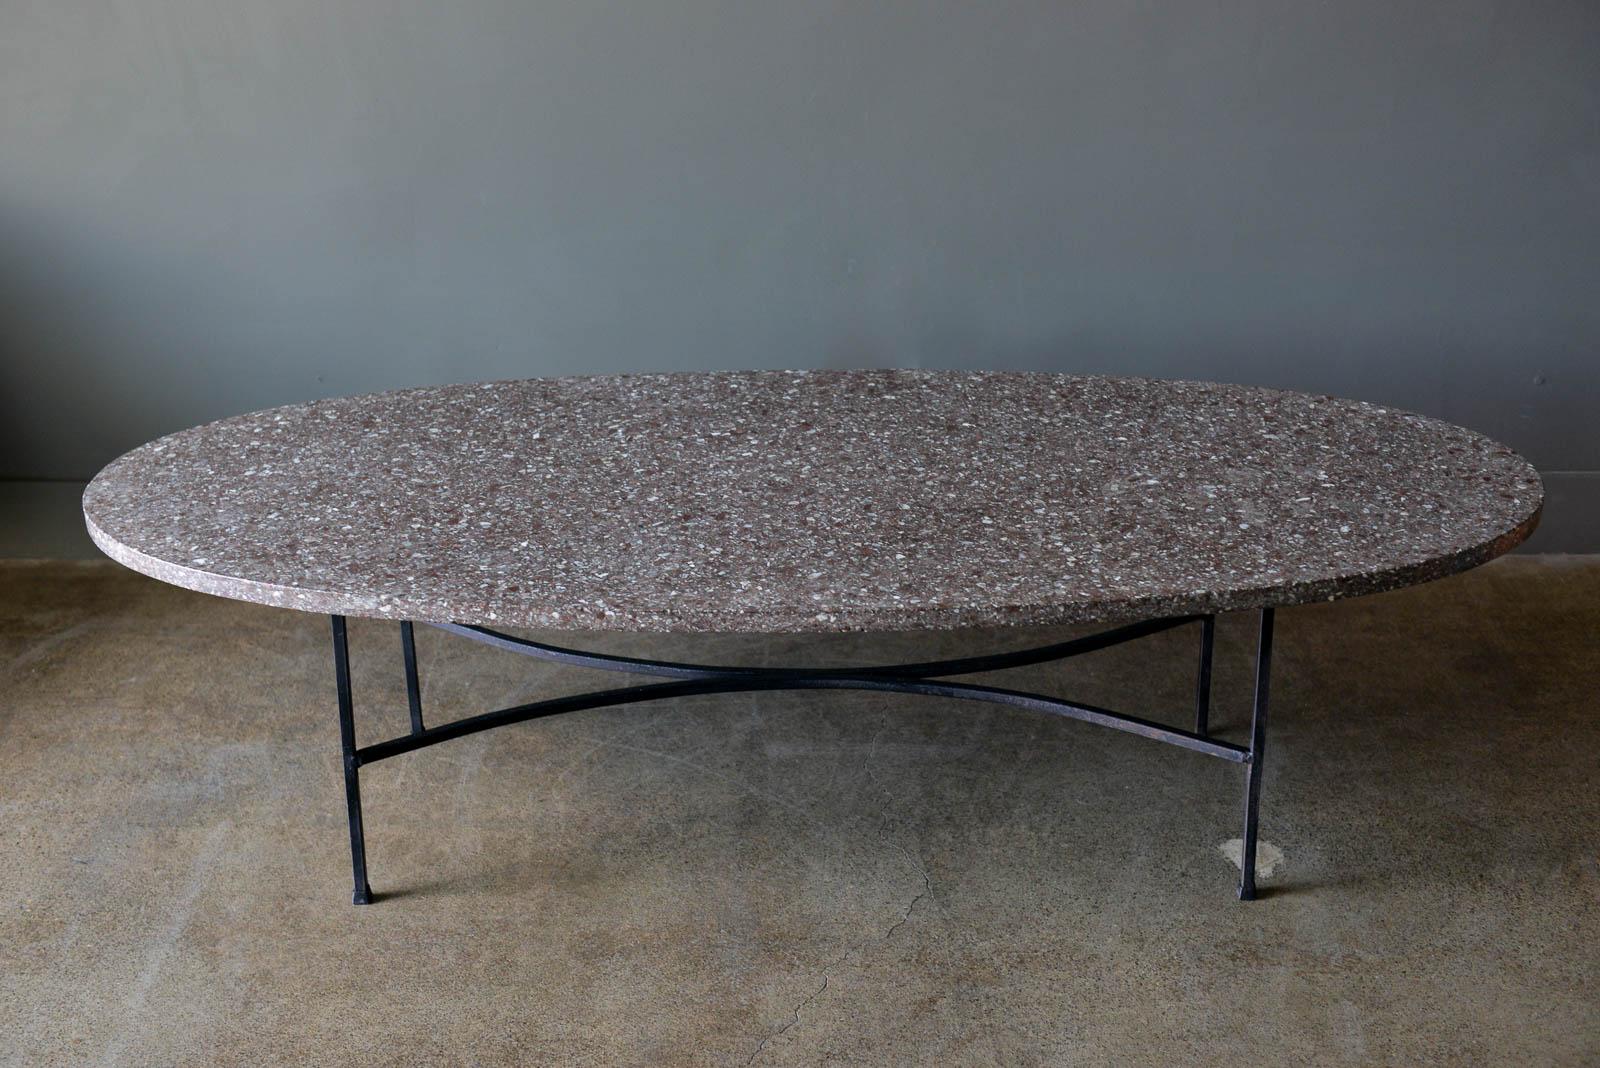 Iron and Terrazzo coffee table, ca. 1965. Beautiful original dark terrazzo with iron base. Original condition. Travertine is good with only sight wear, no cracks. Some tiny 'flea bites' on edges, however not visible but you can feel. Great oval or